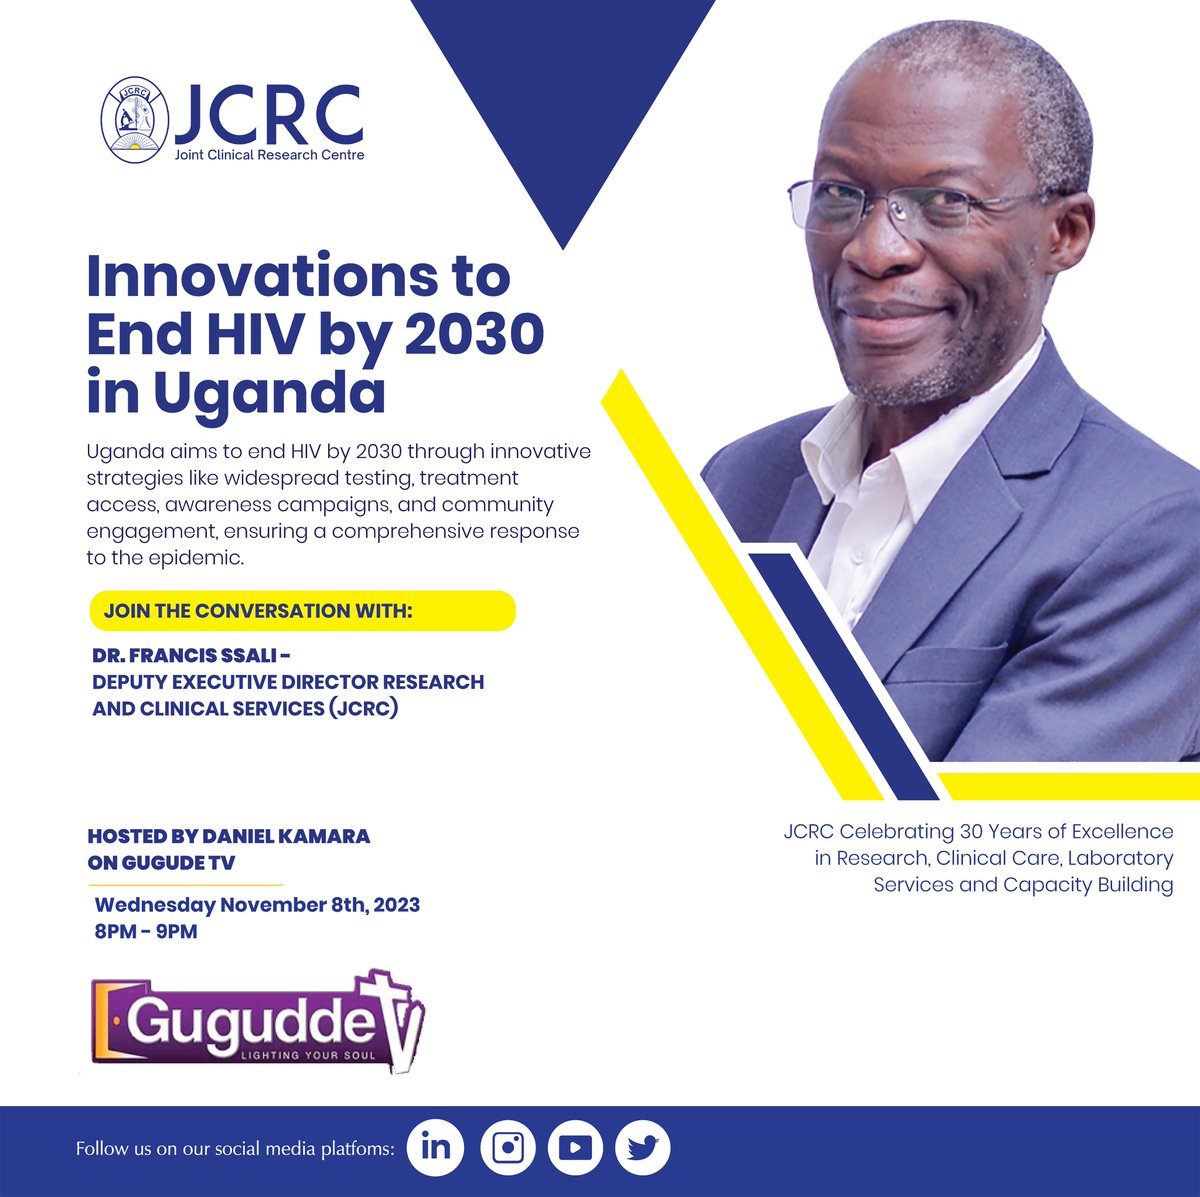 Tomorrow, November 8th, 2023, live on @guguddetvuganda, our Deputy ED Research and Clinical Services - Dr. Francis Ssali will be sharing slights on new HIV innovations at JCRC with @KamaraDaniel3. Please join the conversation from 8 p.m. to 9 p.m. #JCRCAt30